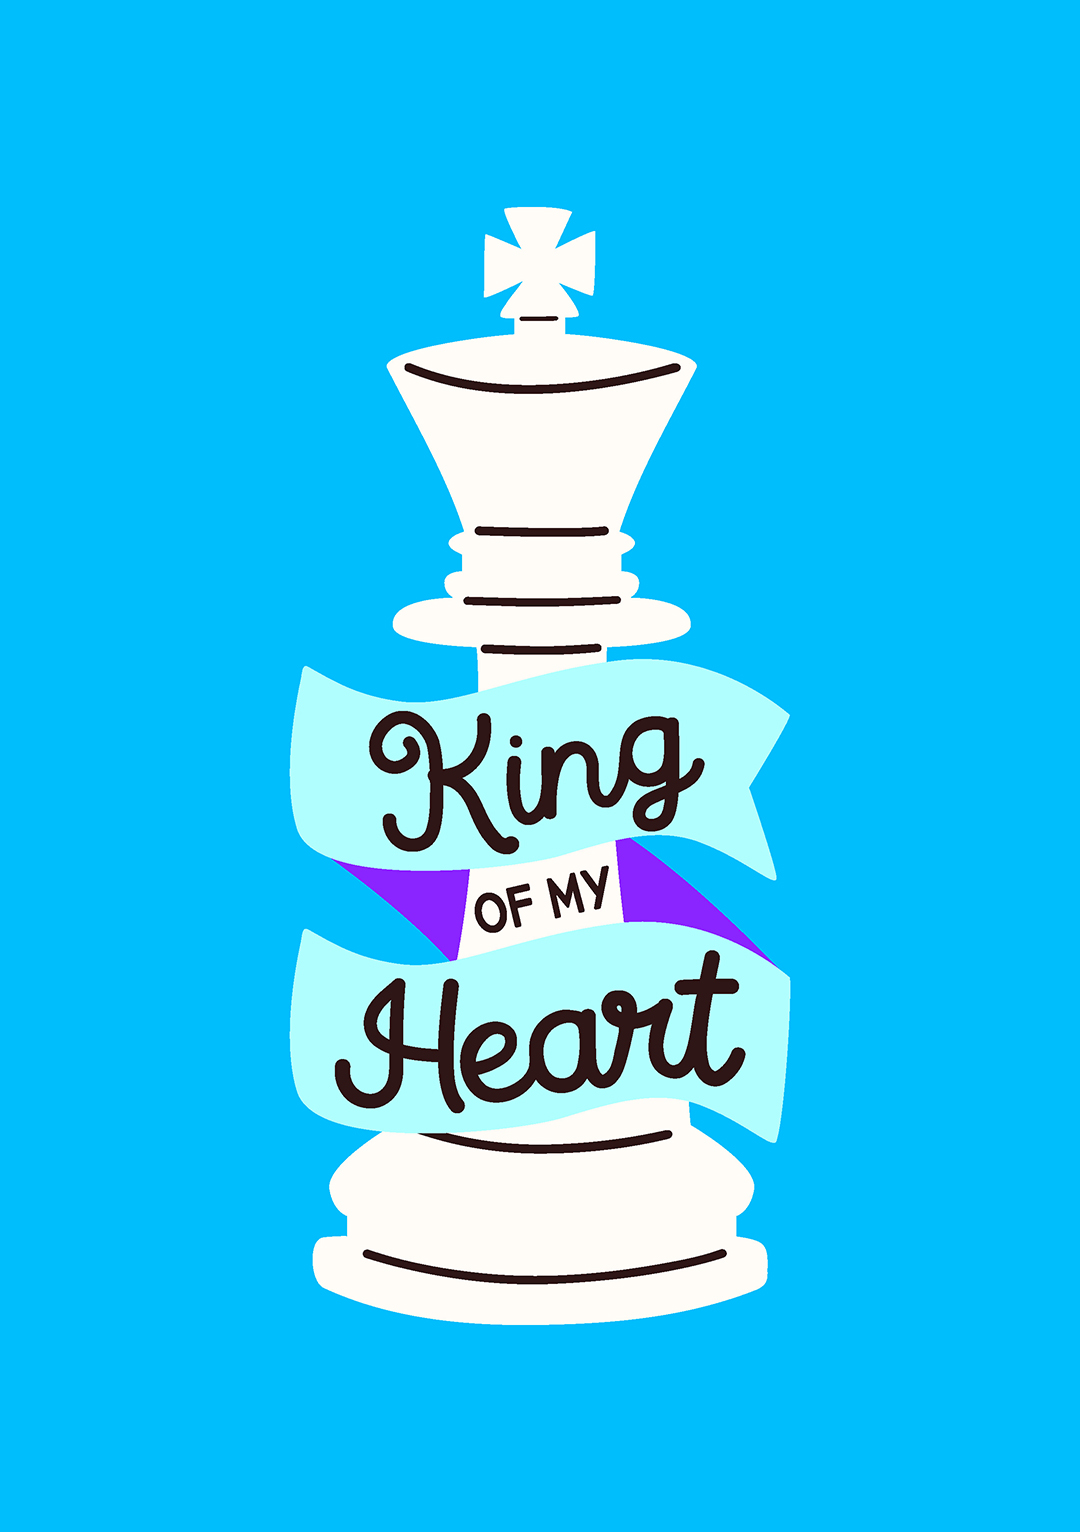 King of My Heart - Valentine's Card